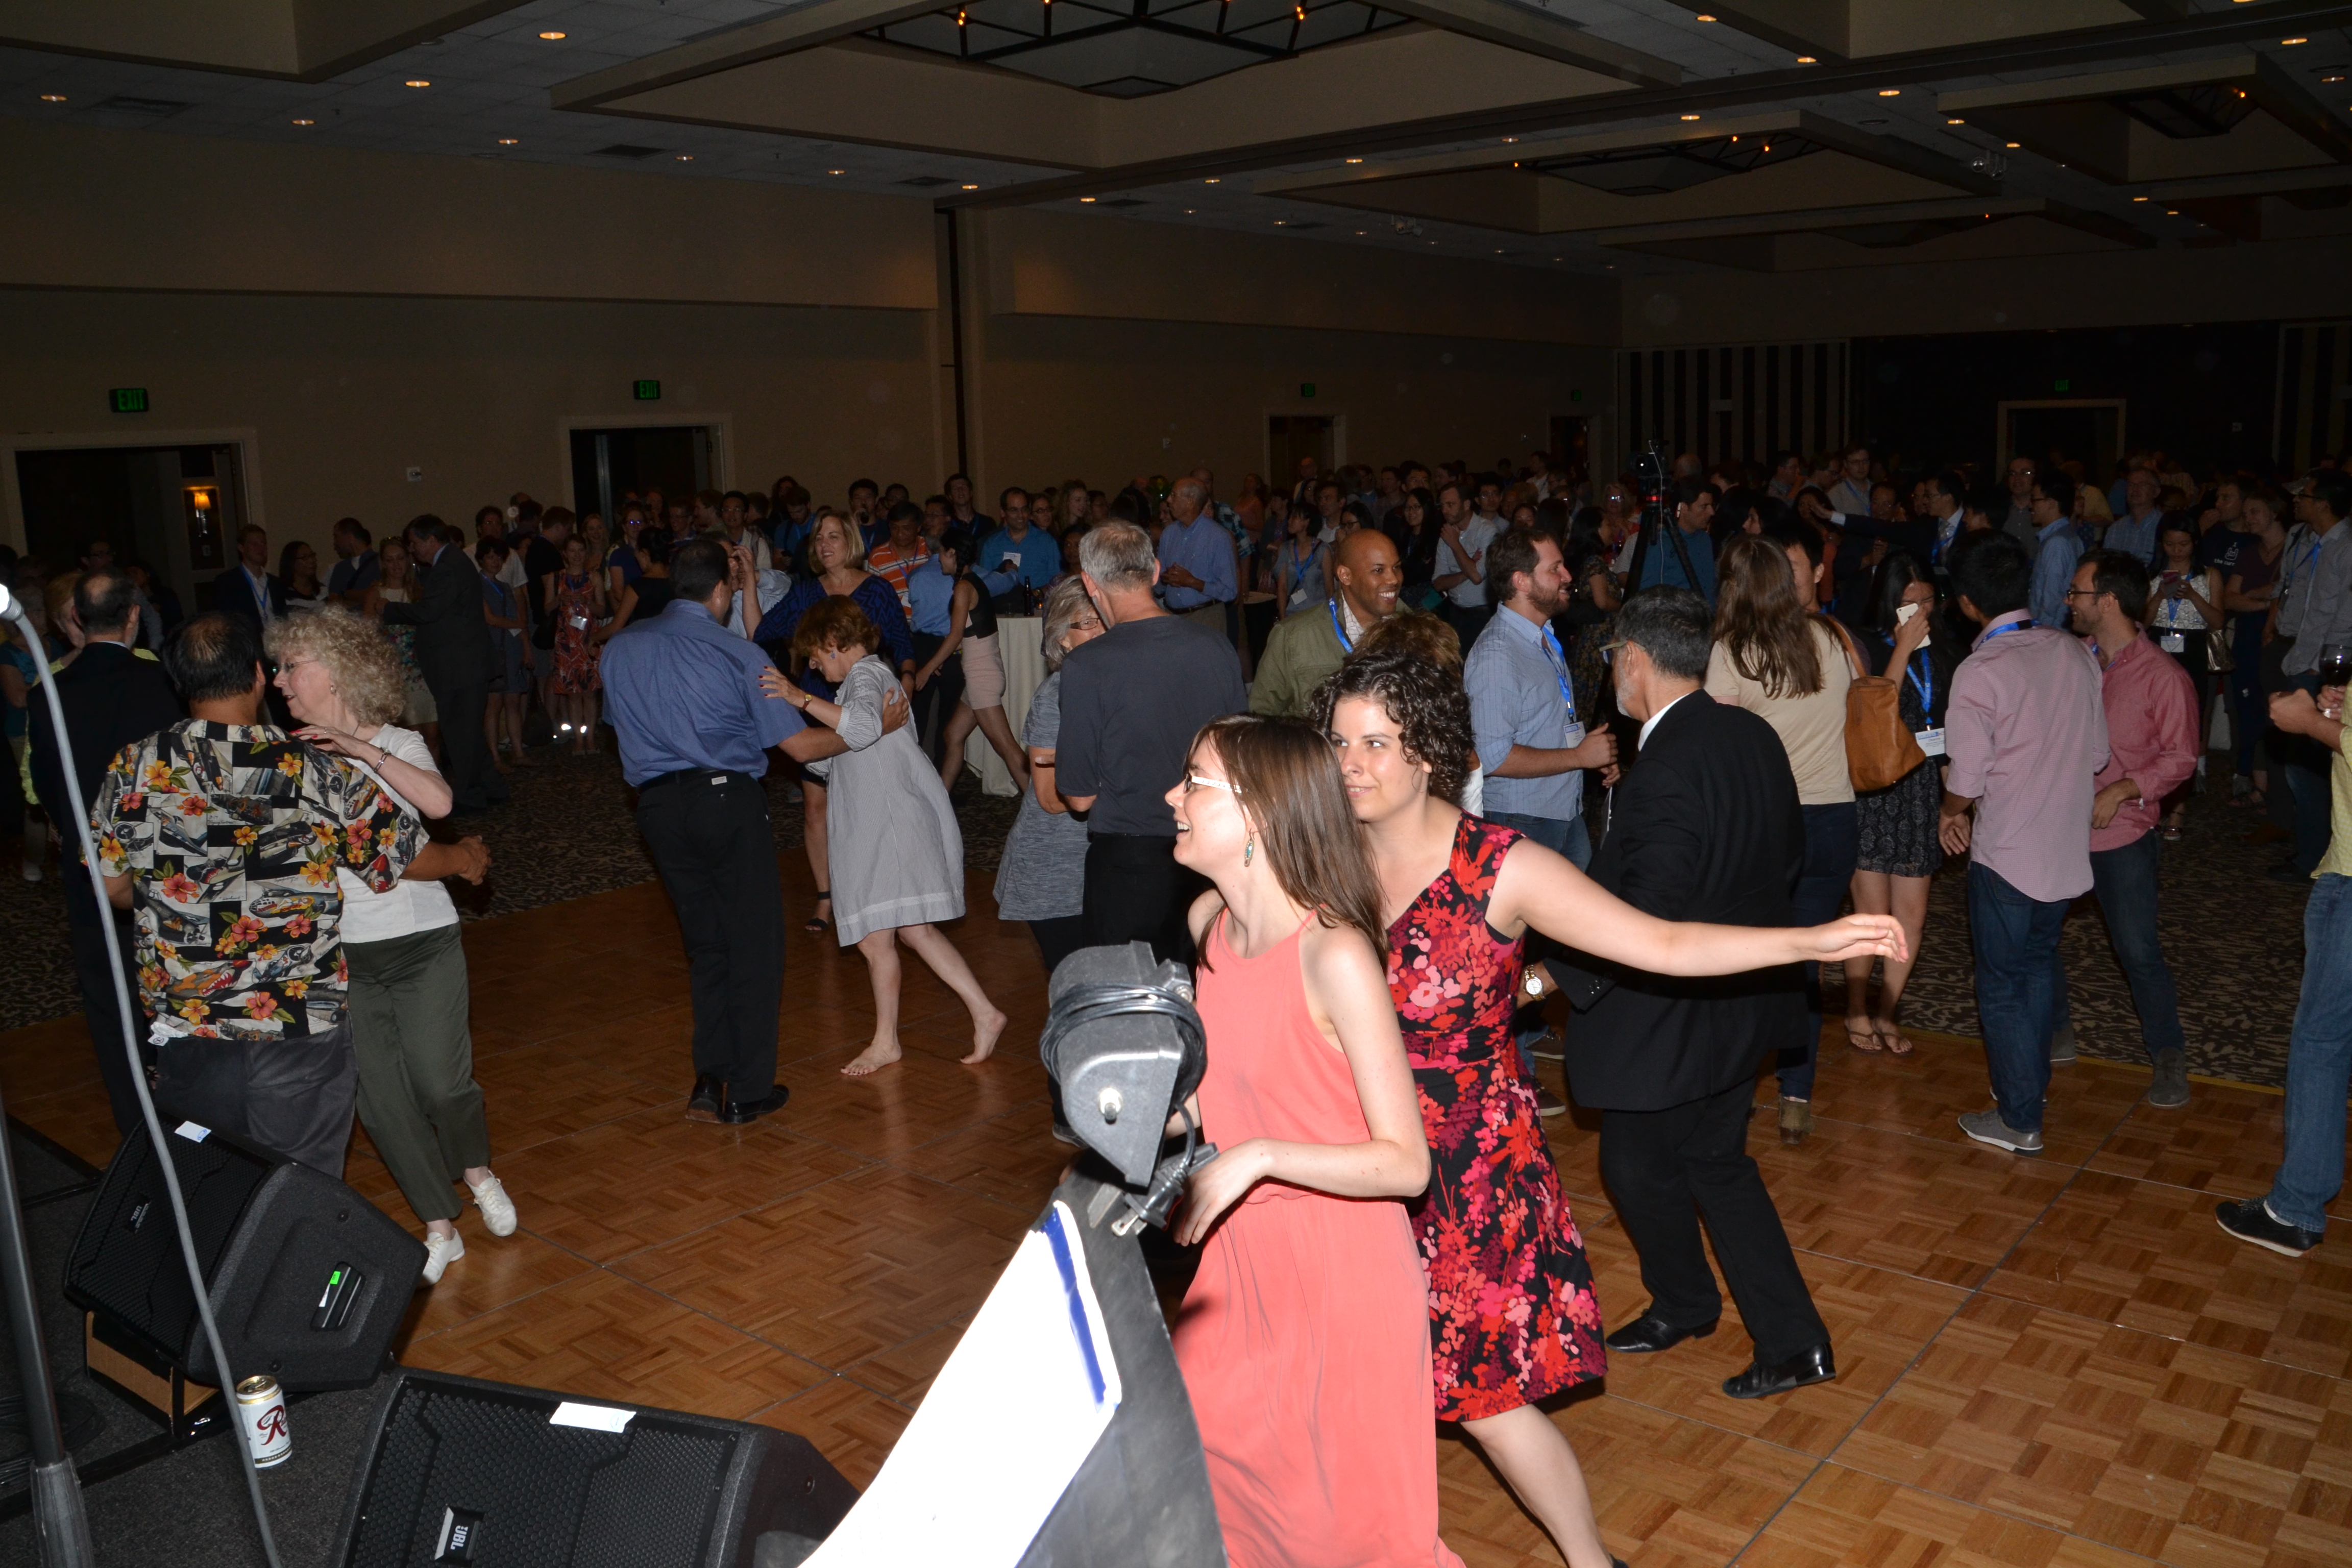 JSM attendees dance the night away at the Dance Party.